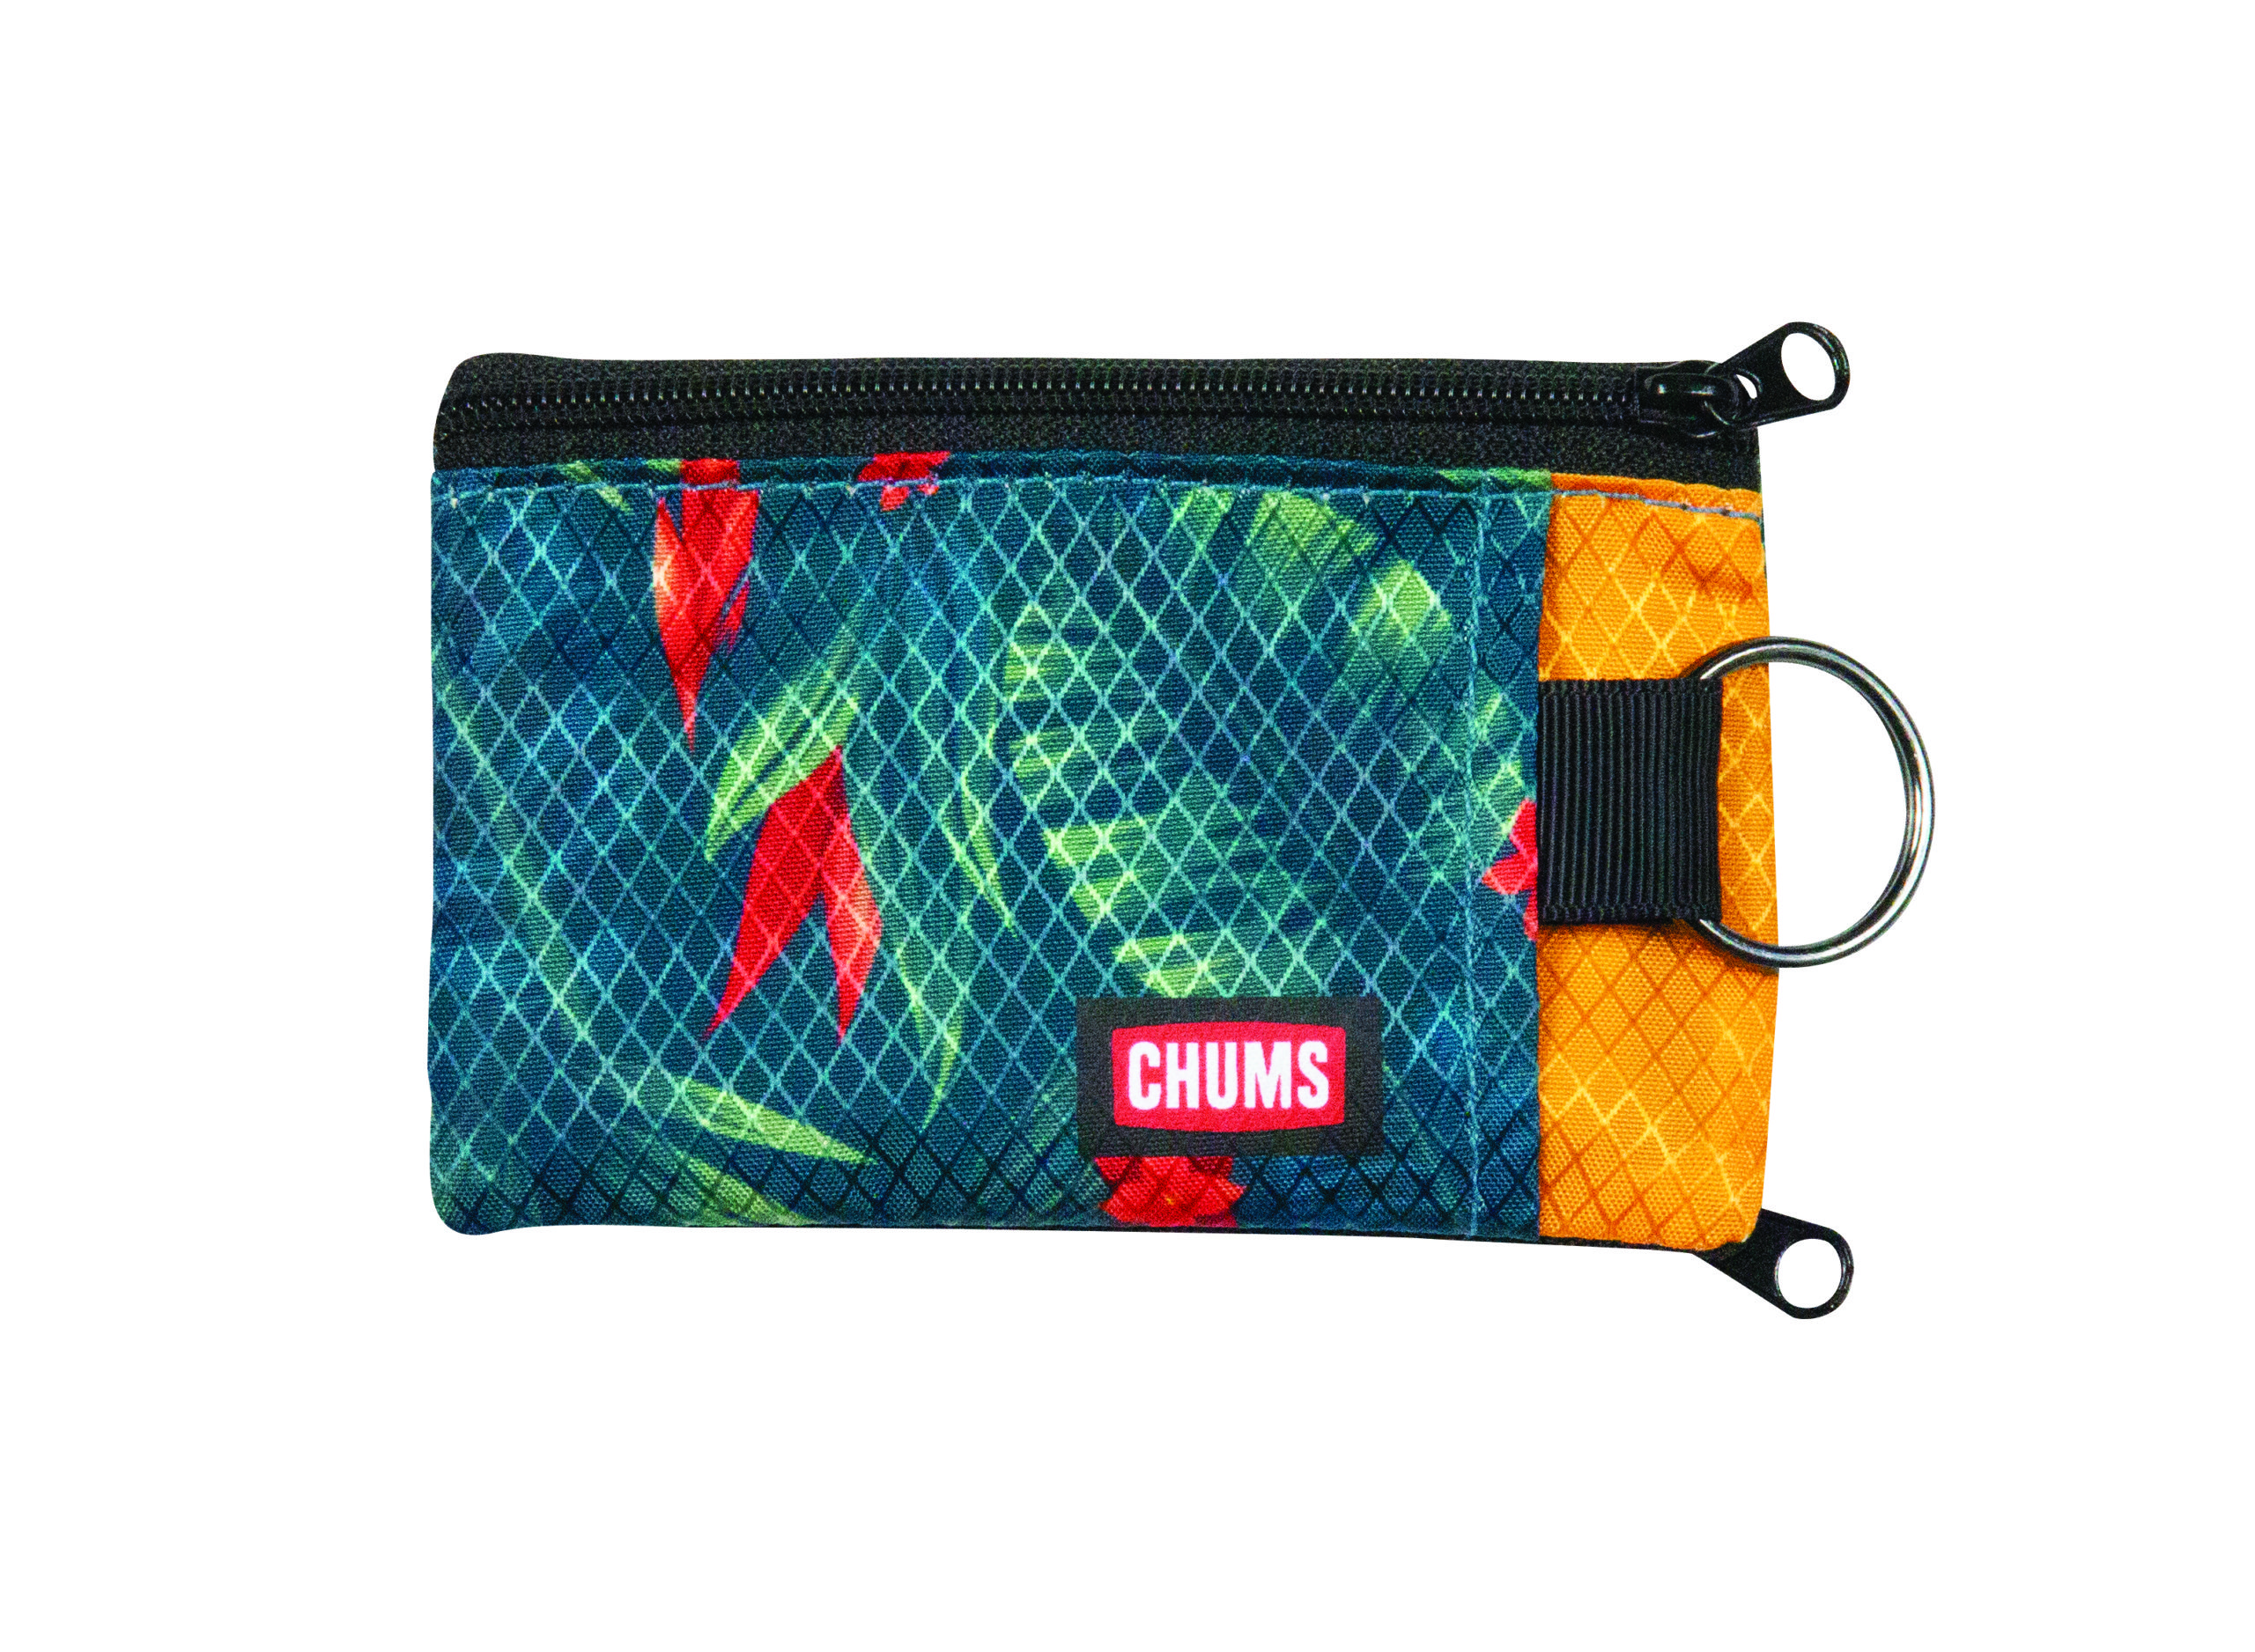 Chums Surfshorts Wallet LTD - Chums Accessories, Chums Wallets ...